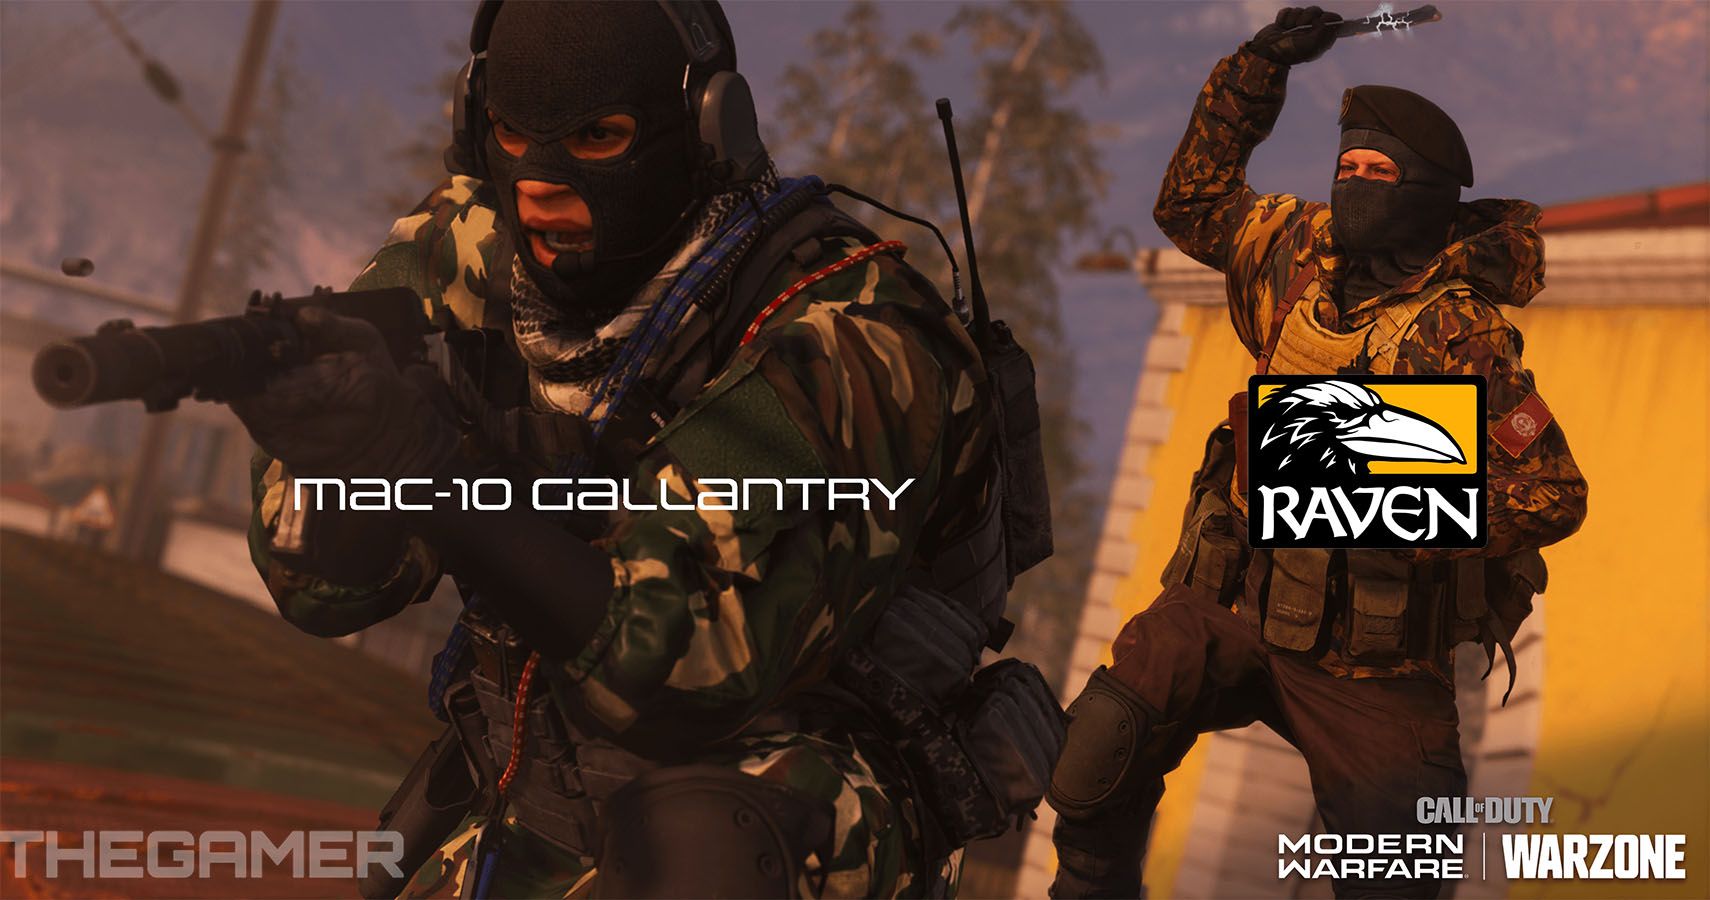 Official Screenshot from Activision with Raven Software and TheGamer logos and custom text.